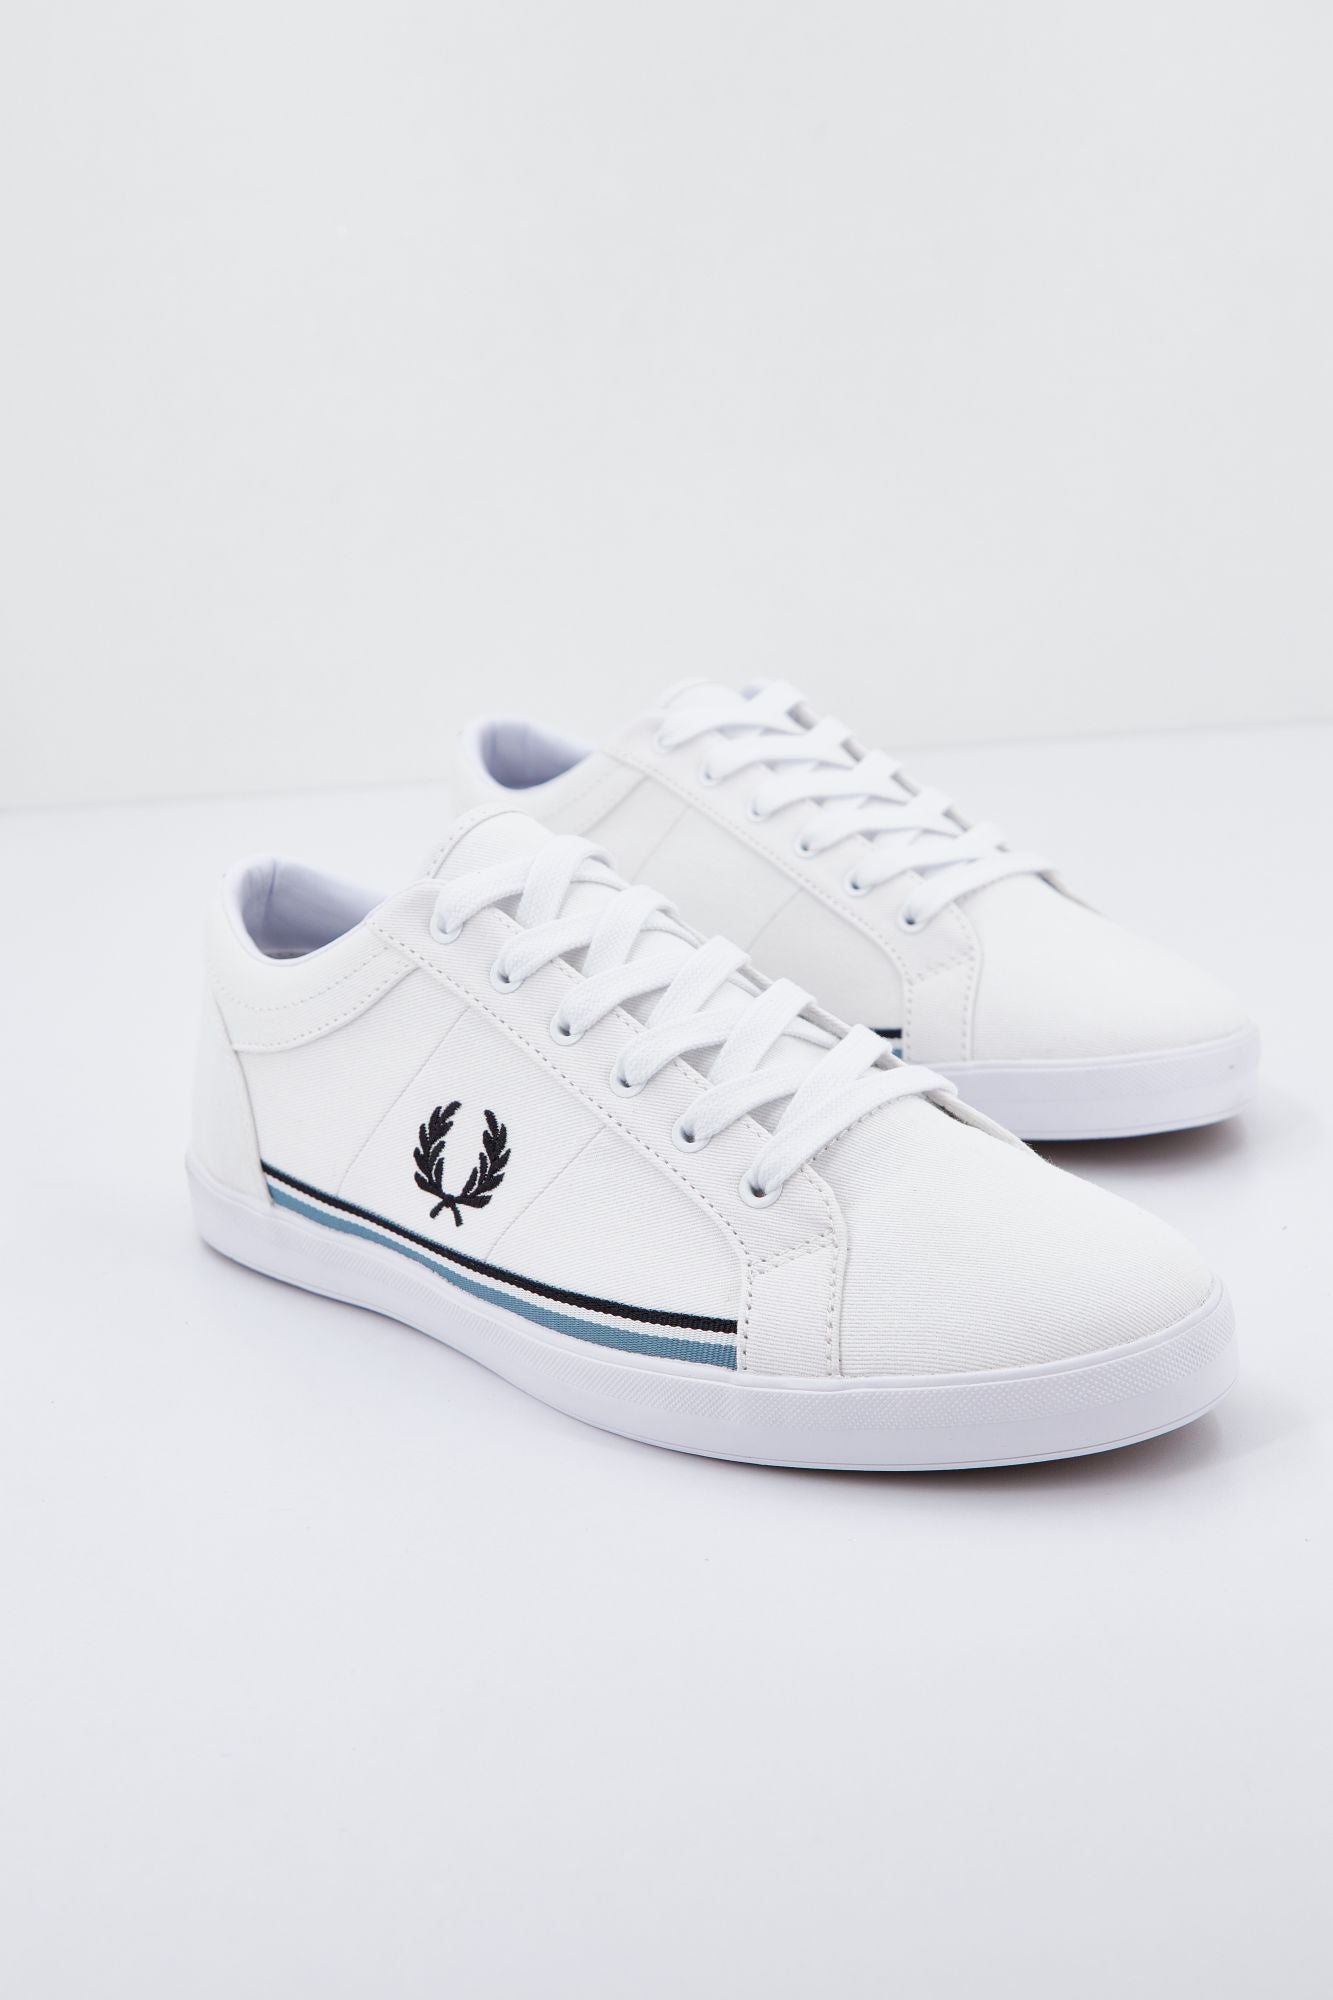 FRED PERRY BASELINE TWILL en color BLANCO (1)